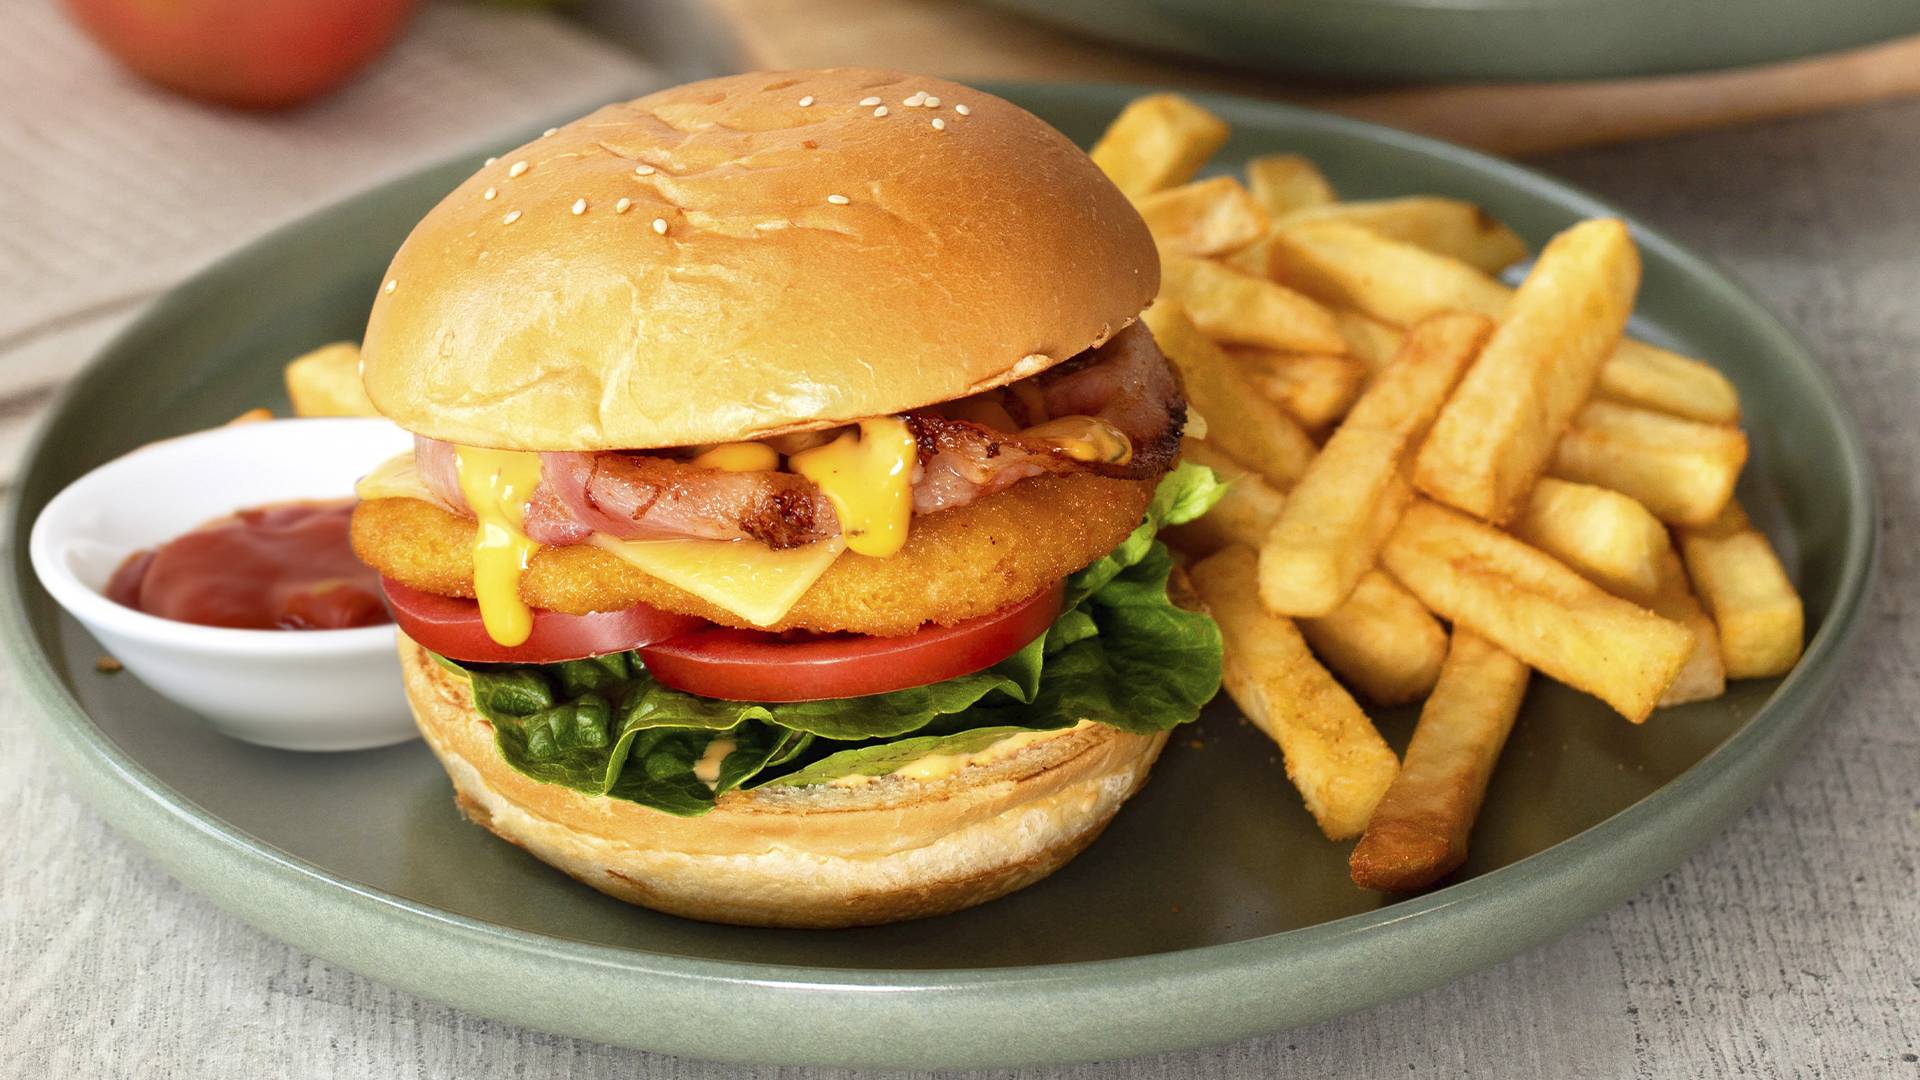 Crispy Chicken & Bacon Burger with Chips